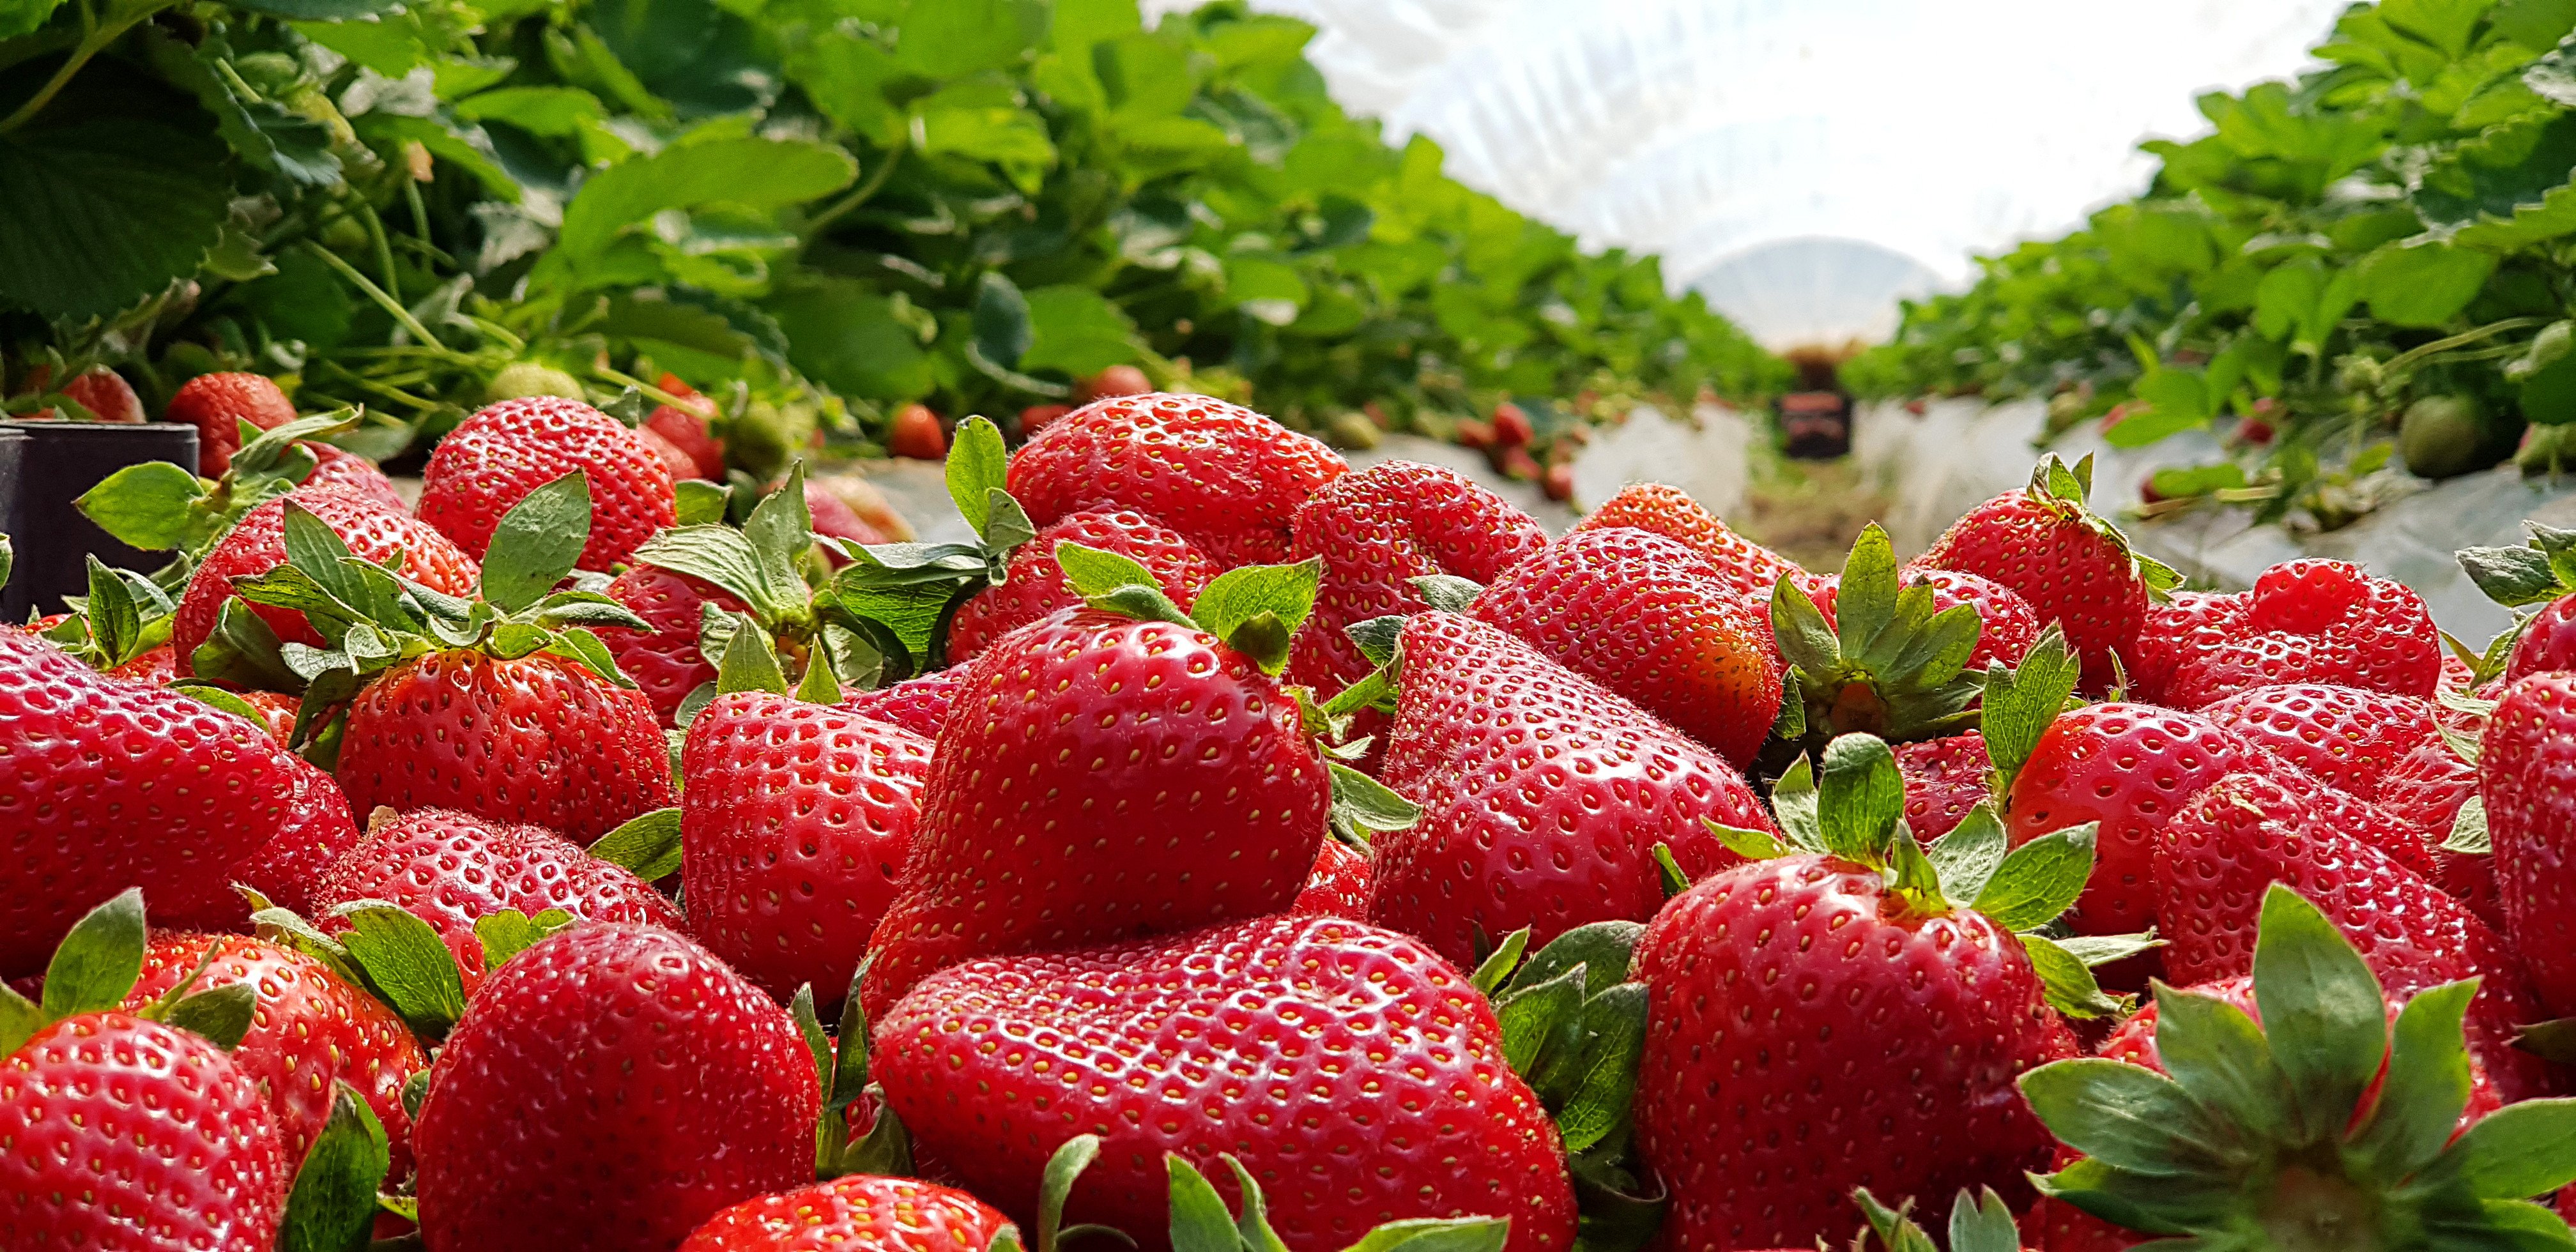 Strawberries have been found to contain a compound that reduces the risk of getting Alzheimer’s disease. They are not the only superfood good for brain health – fatty fish,  walnuts and wasabi have similar properties. Photo: Shutterstock